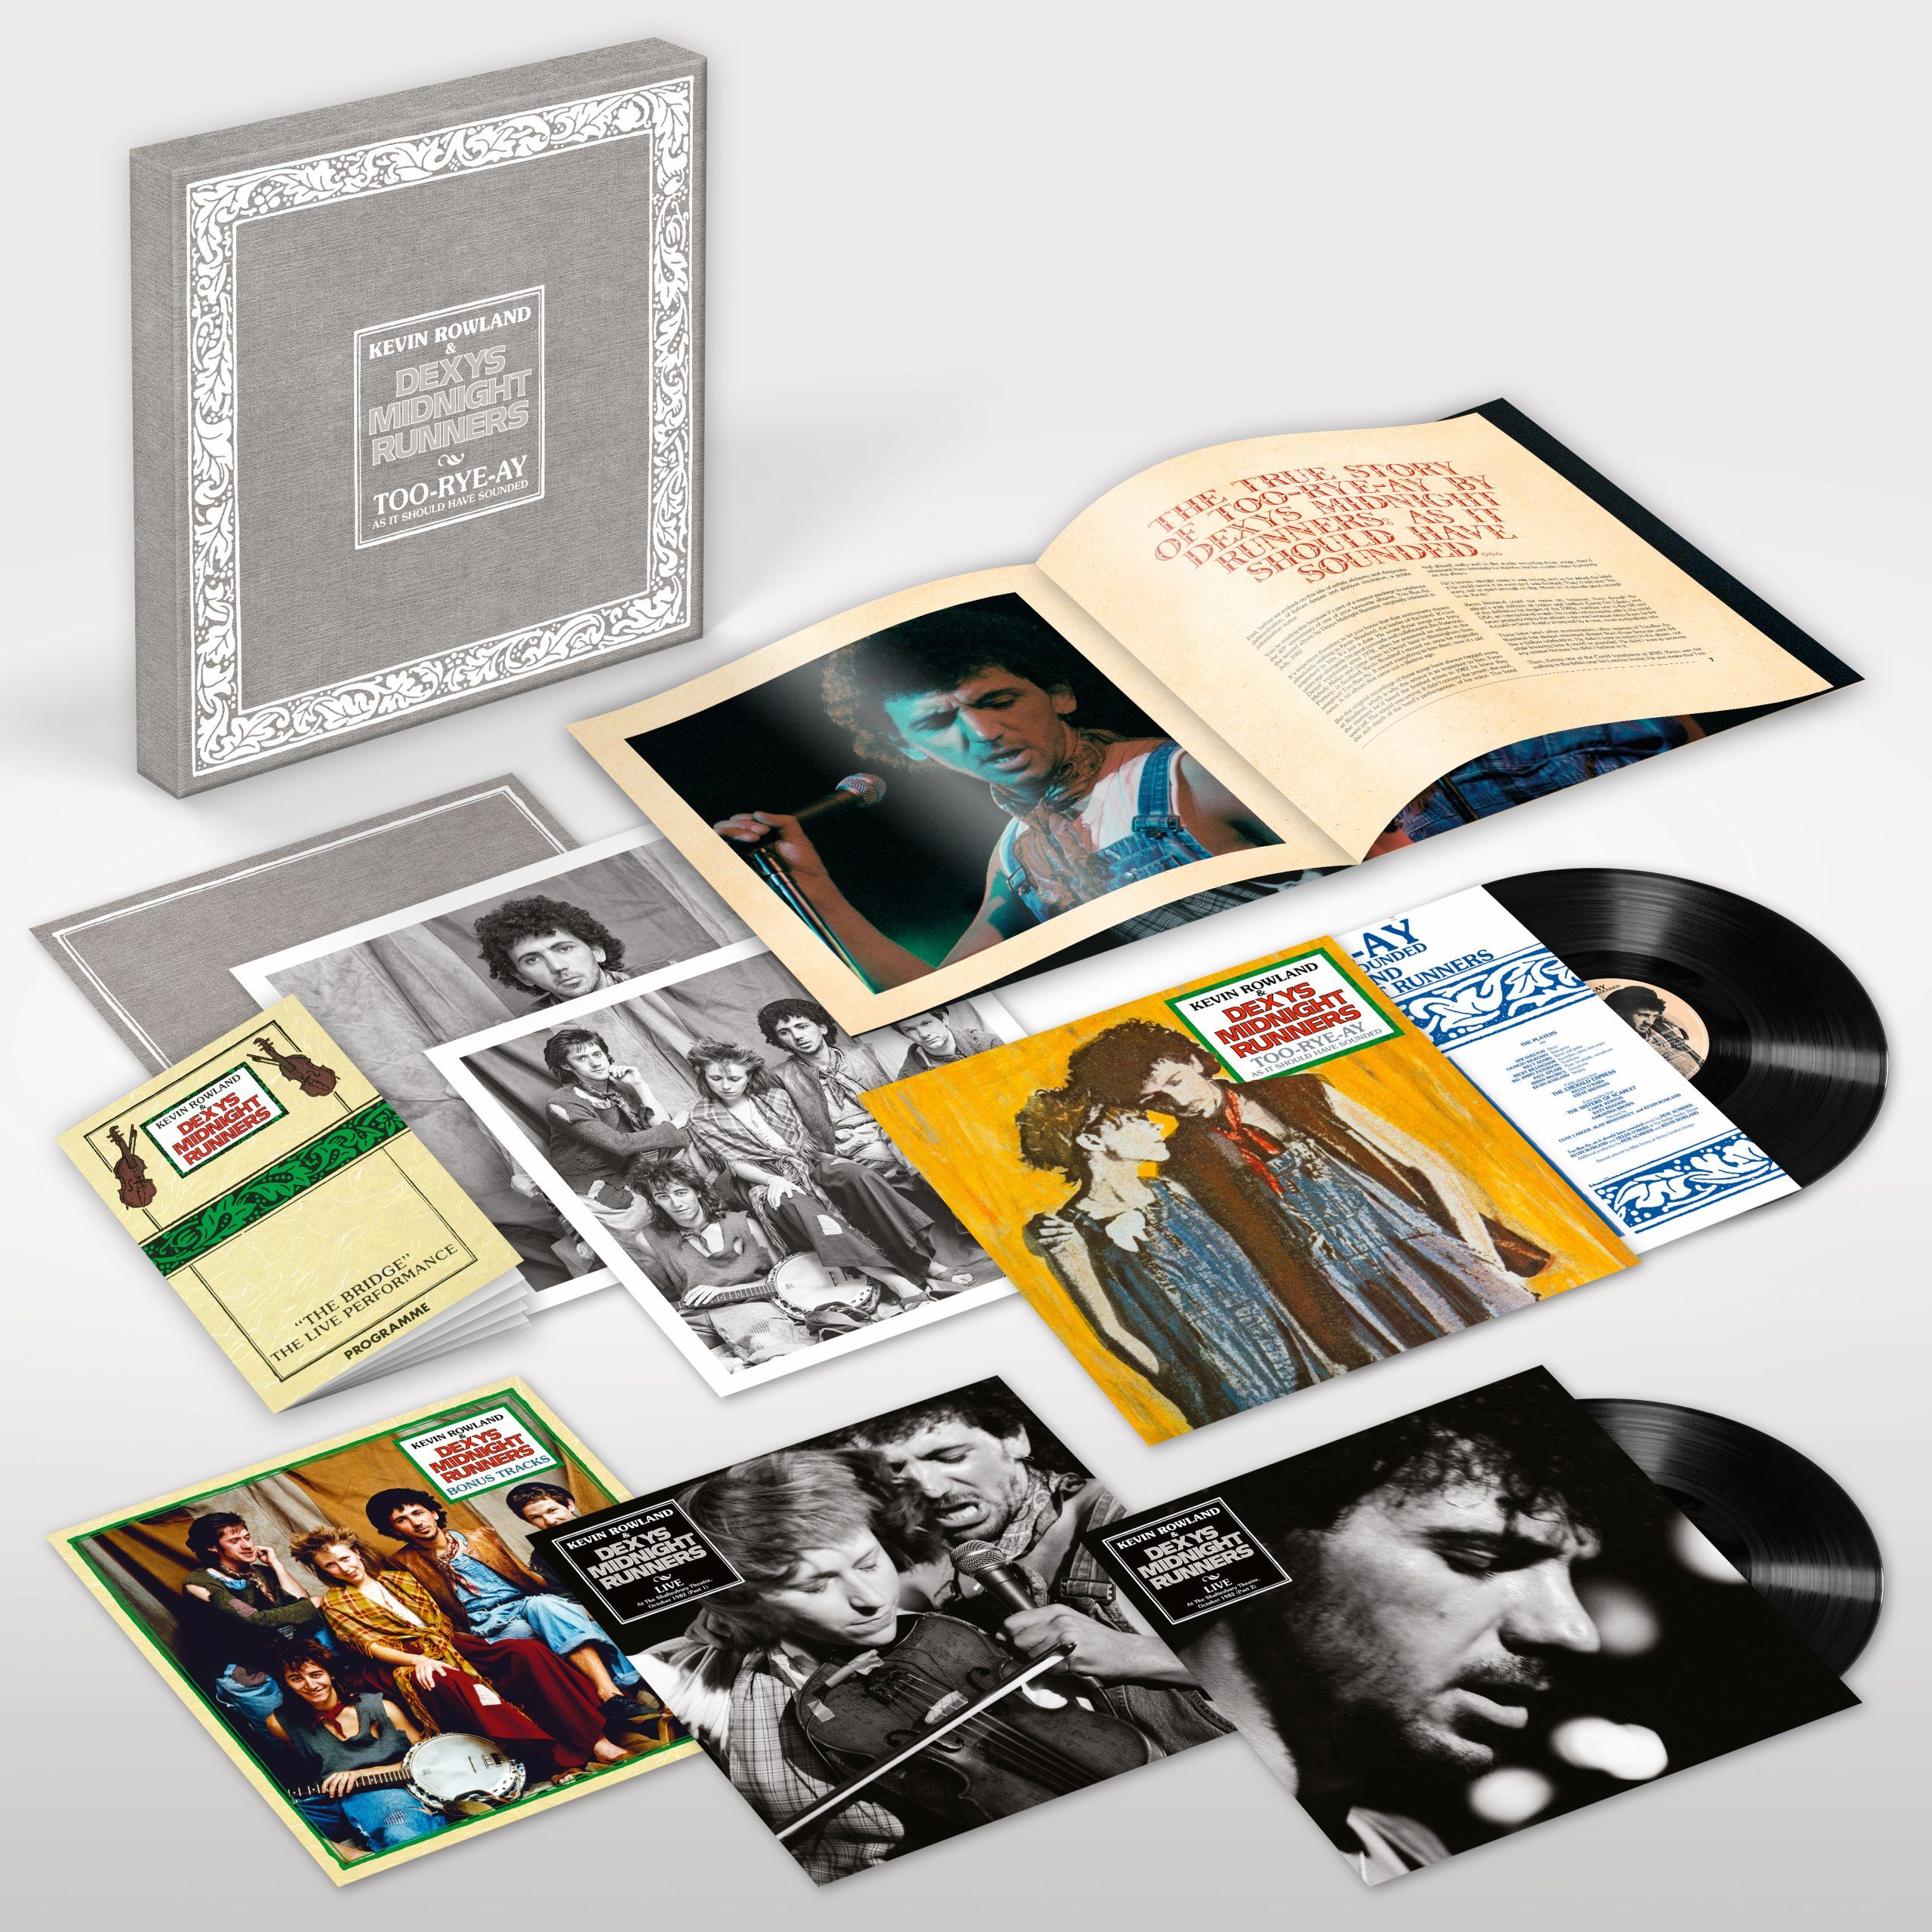 Kevin Rowland and Dexys Midnight Runners Too-Rye-Ay Boxset 3D